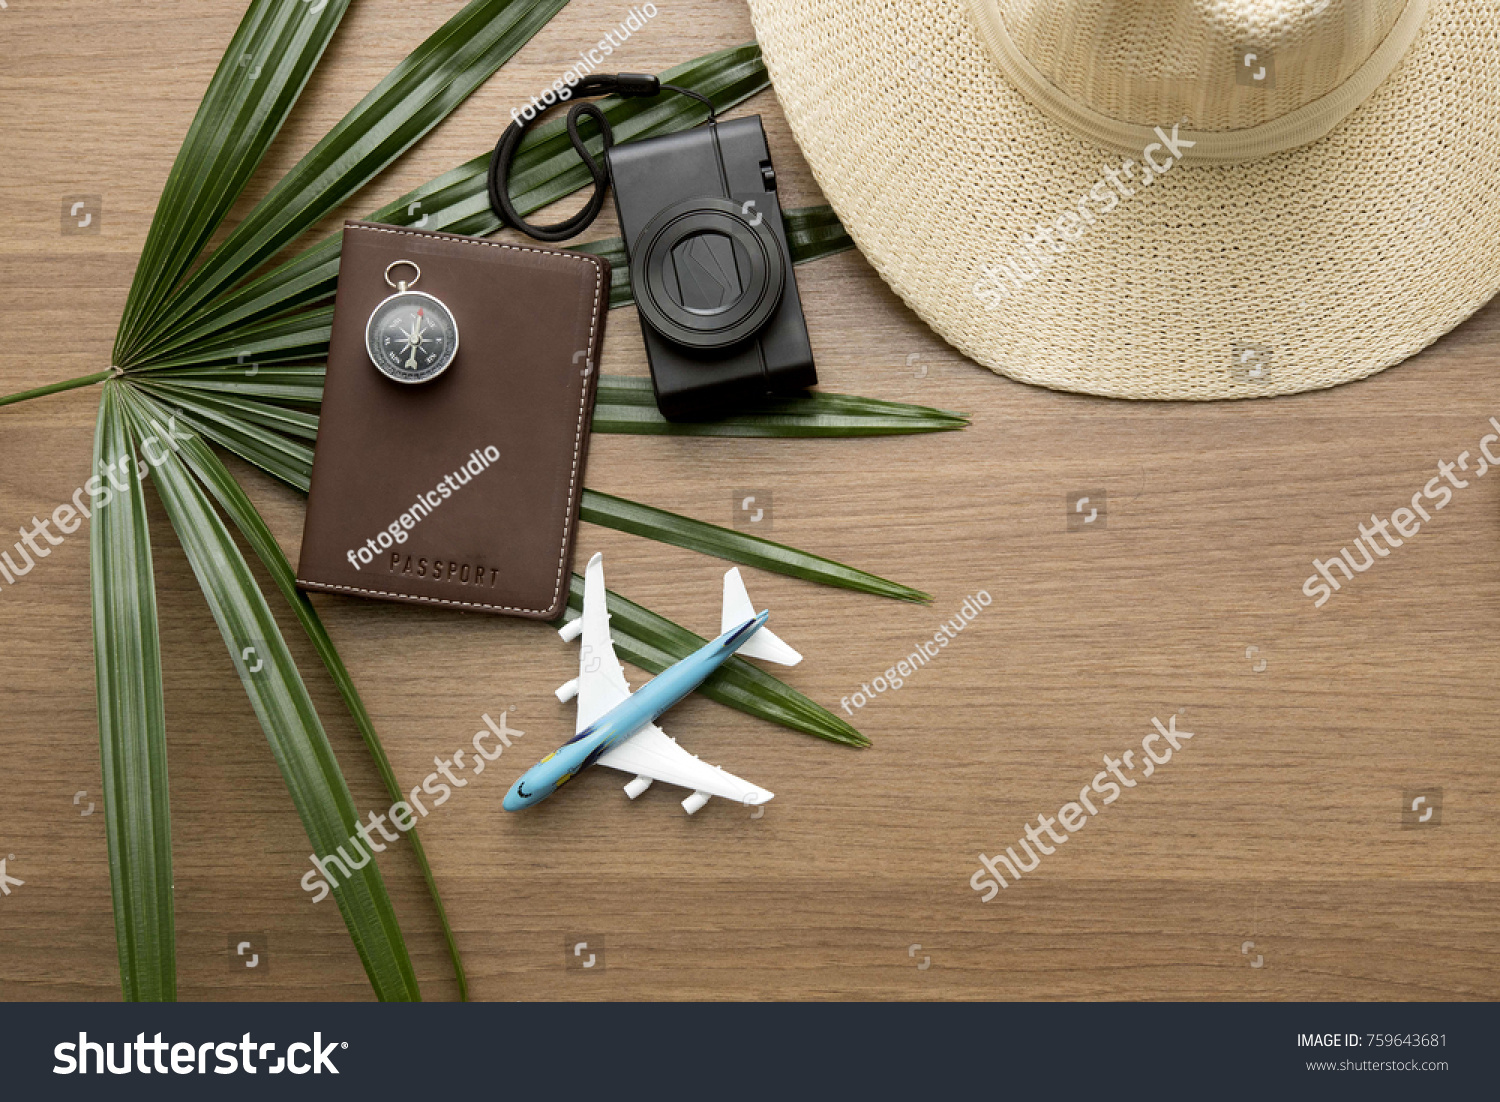 Travel Accessories On Wooden Desk Background Stock Photo Edit Now